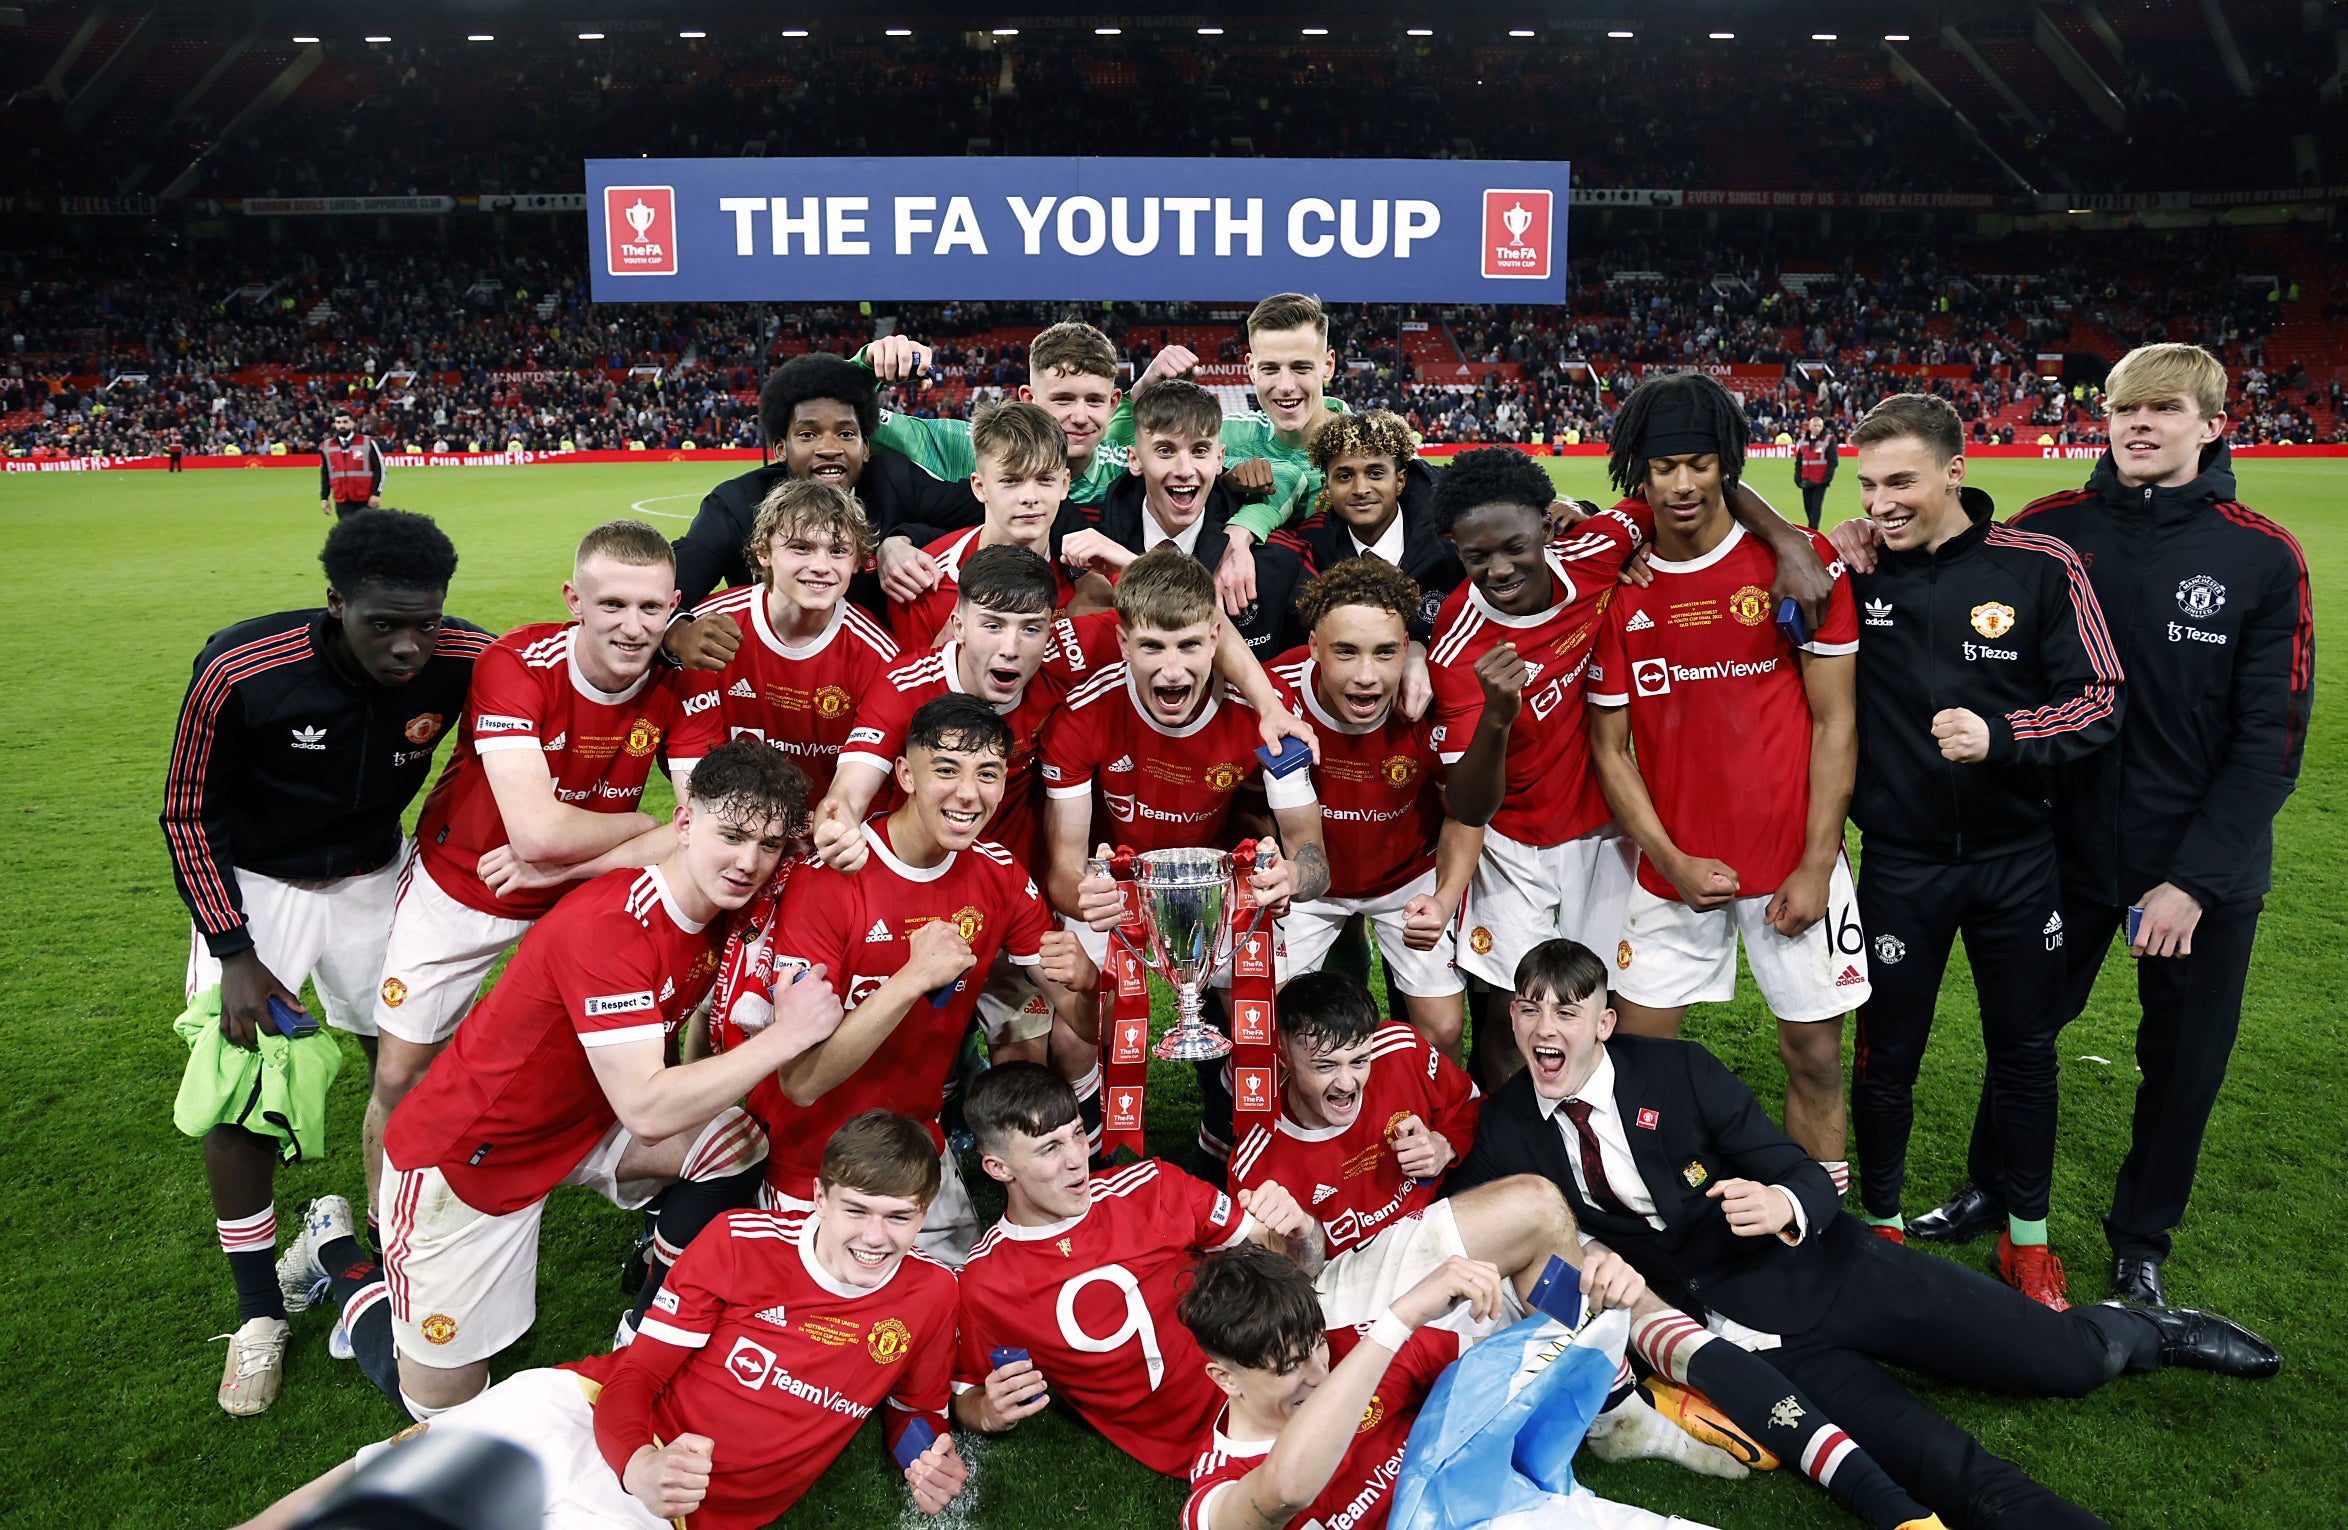 Manchester United players celebrate after winning the FA Youth Cup final (Richard Sellers/PA)